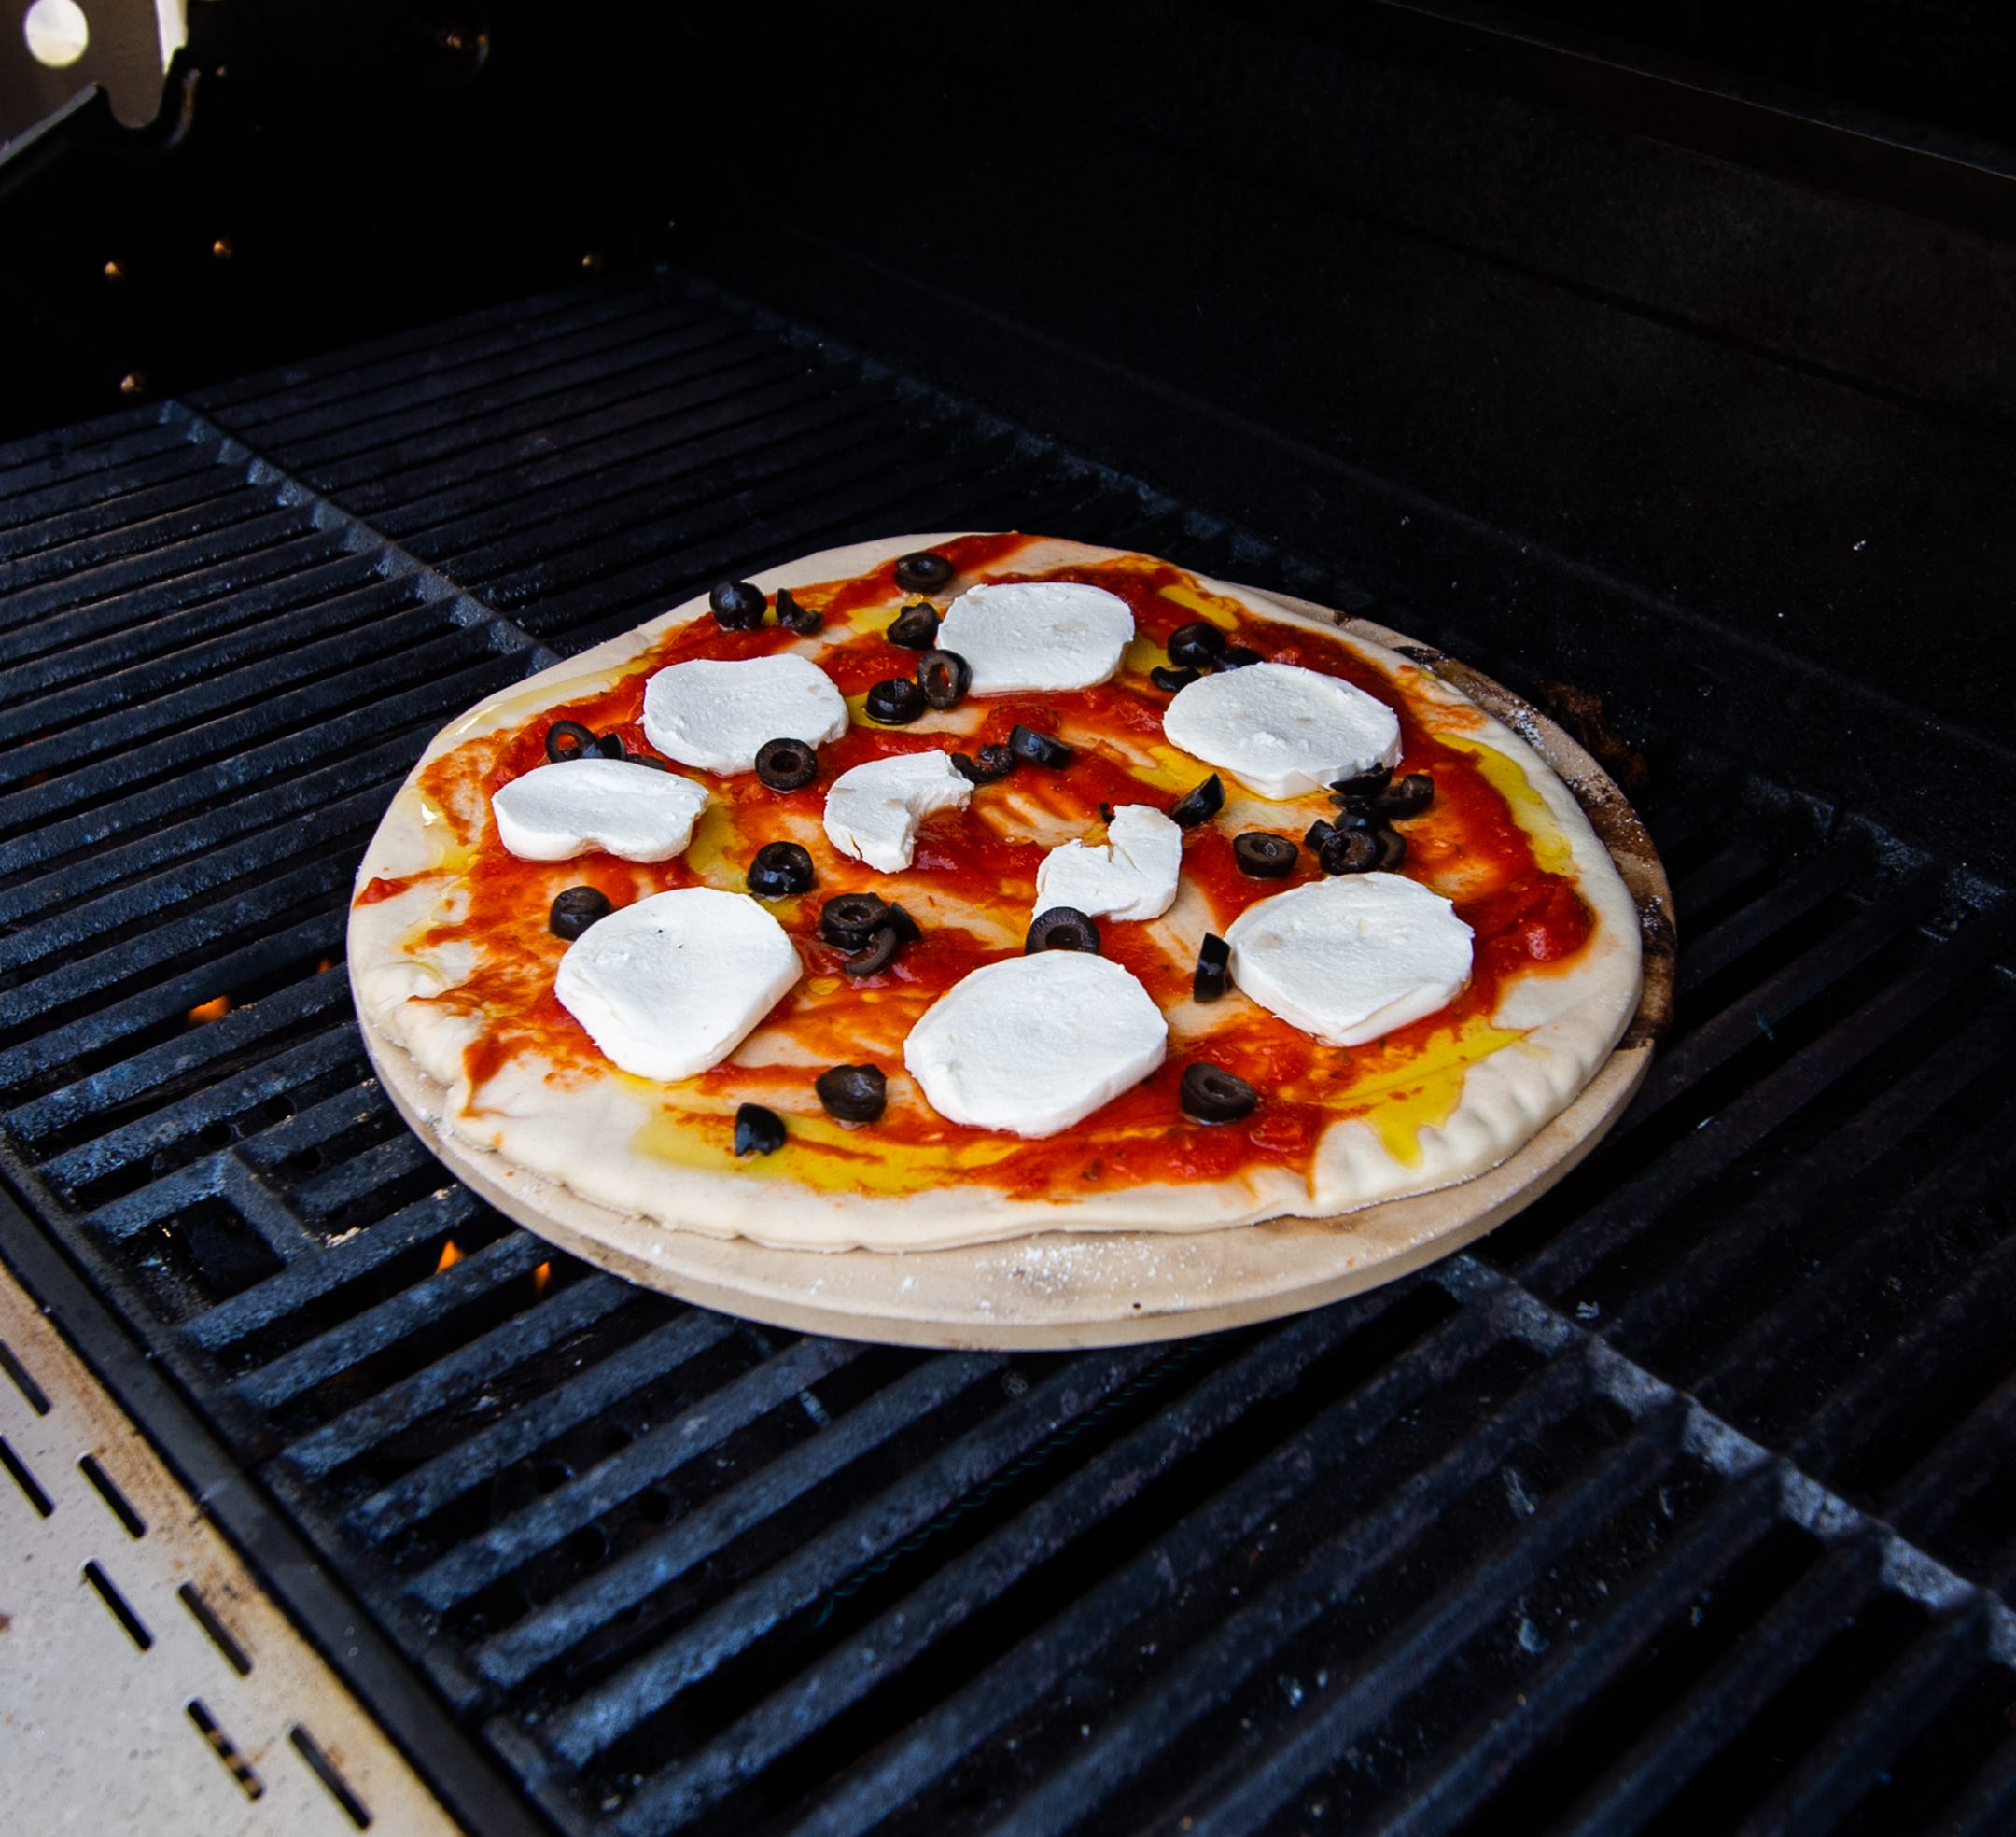 Grilled pizza is better than oven-baked pizza; here's how to make it